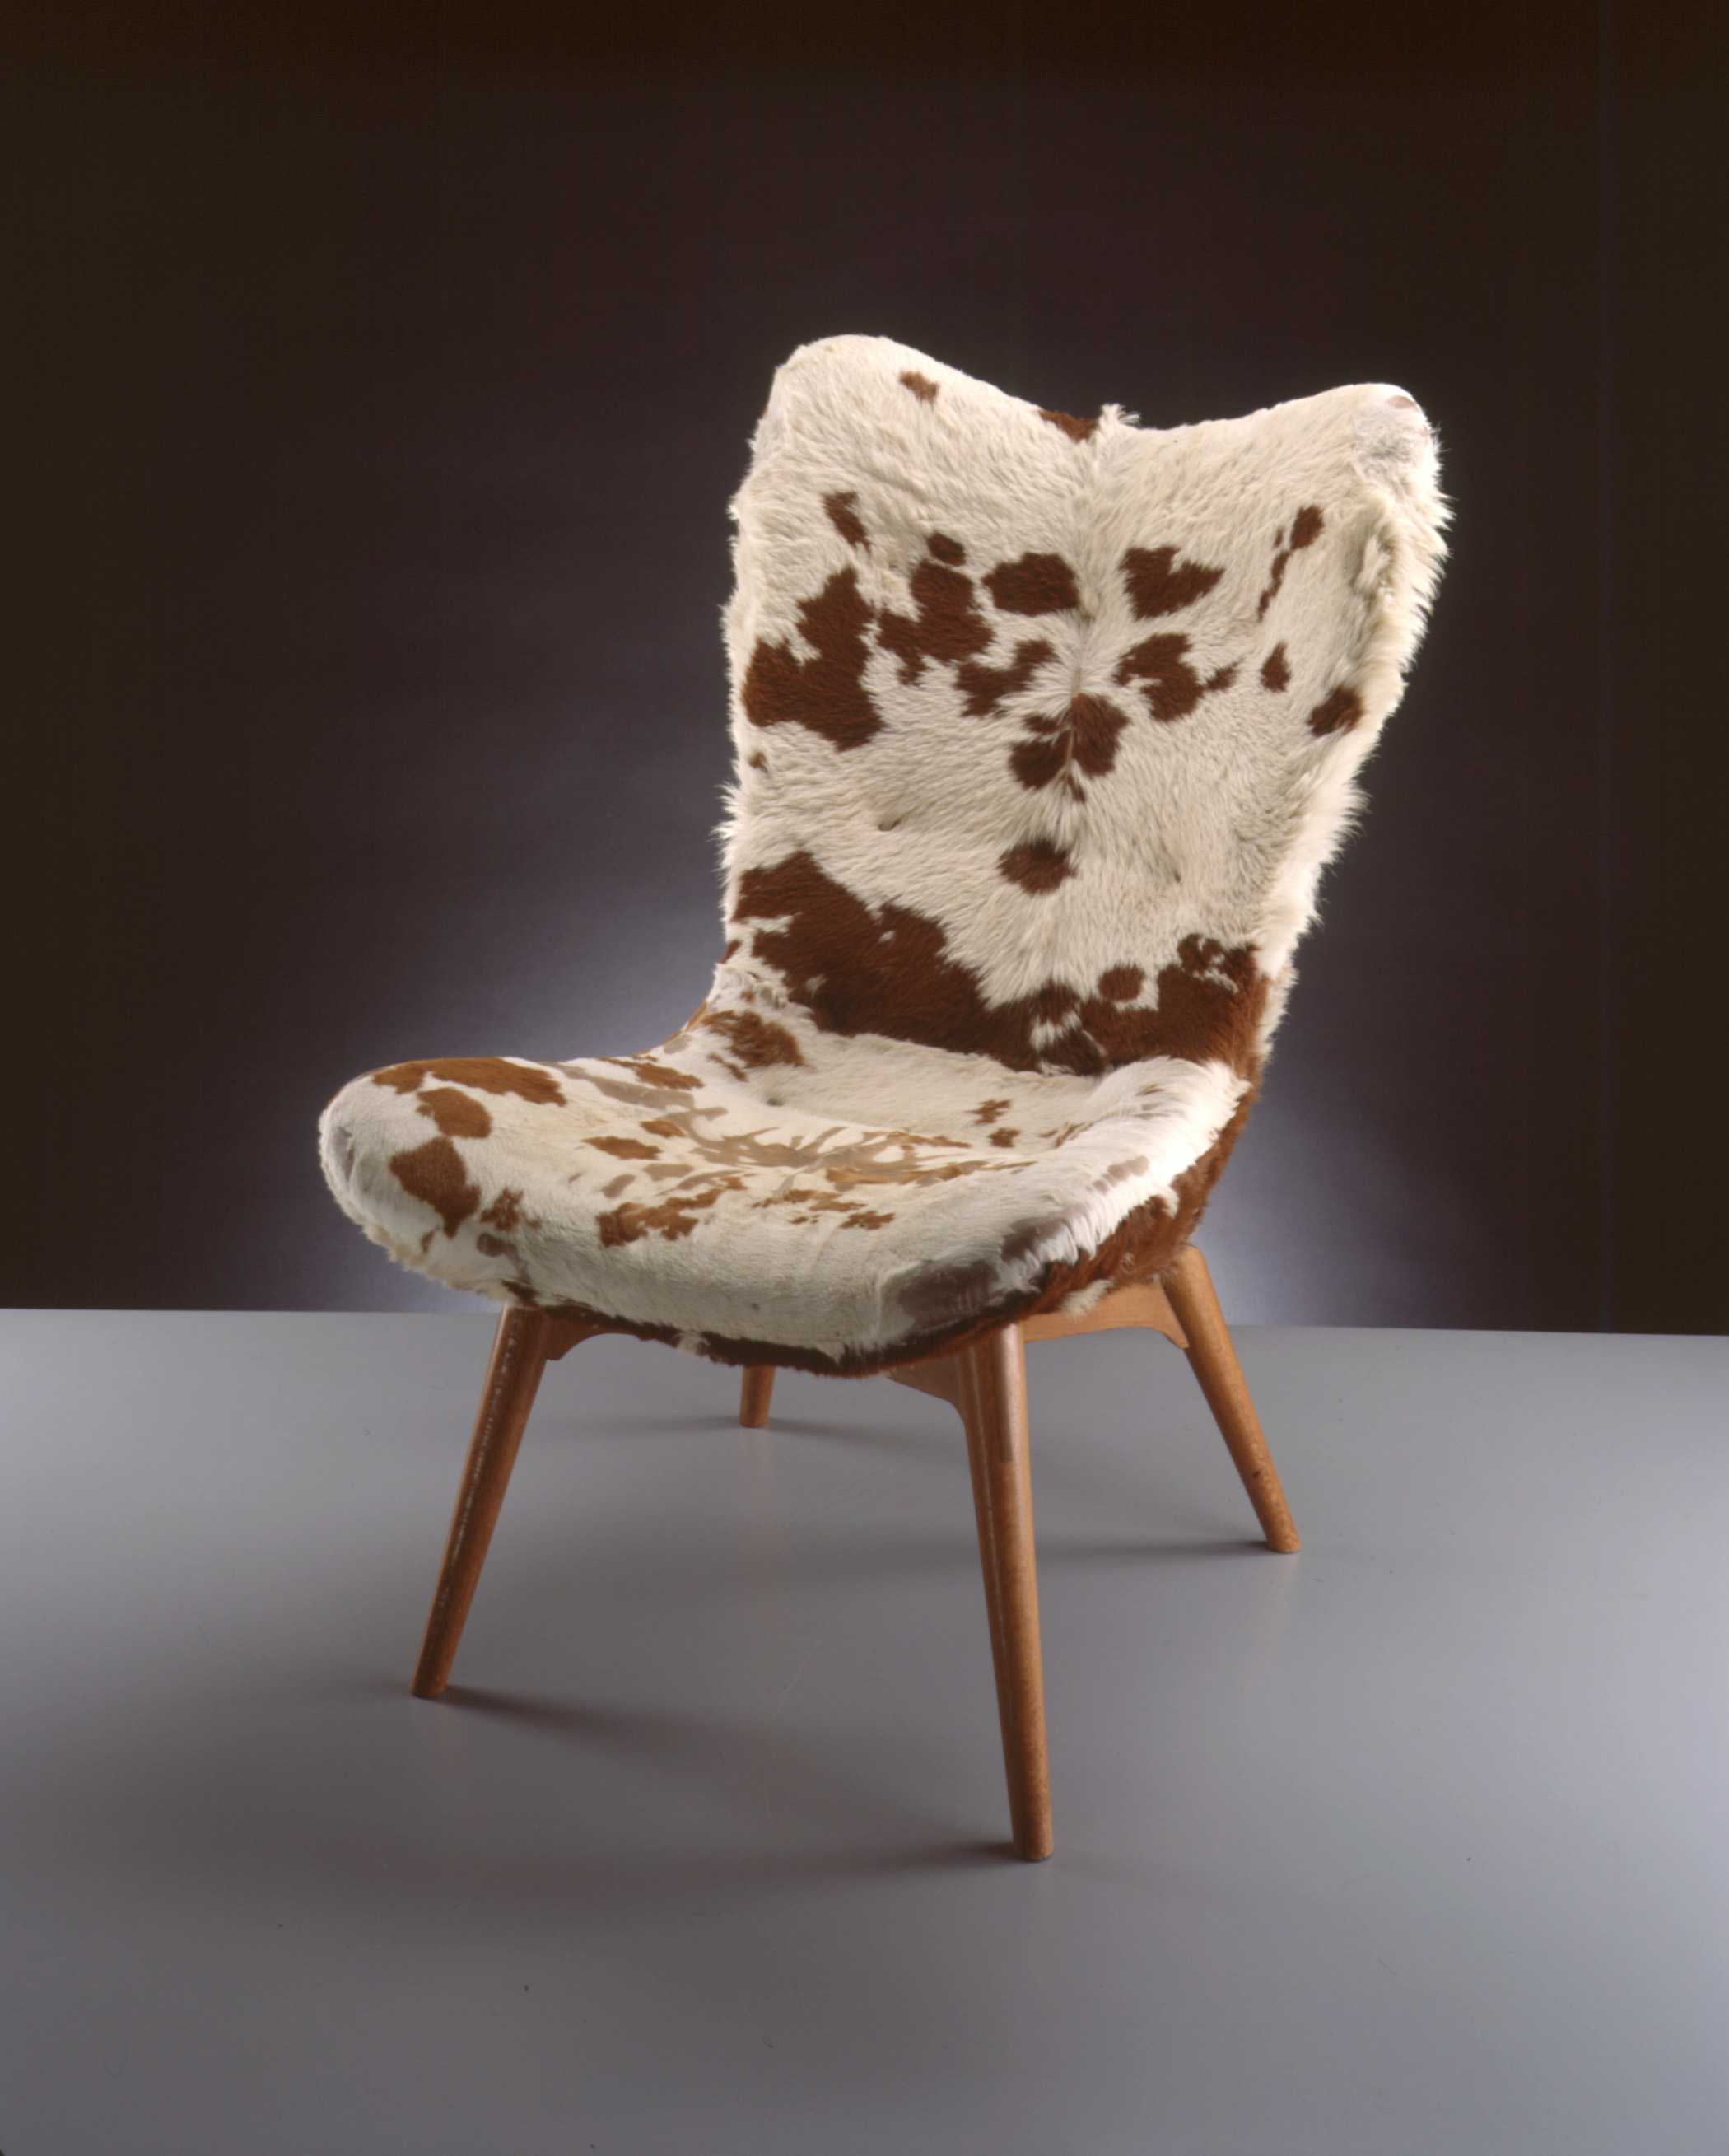 R152 Contour Chair designed by Grant Featherston